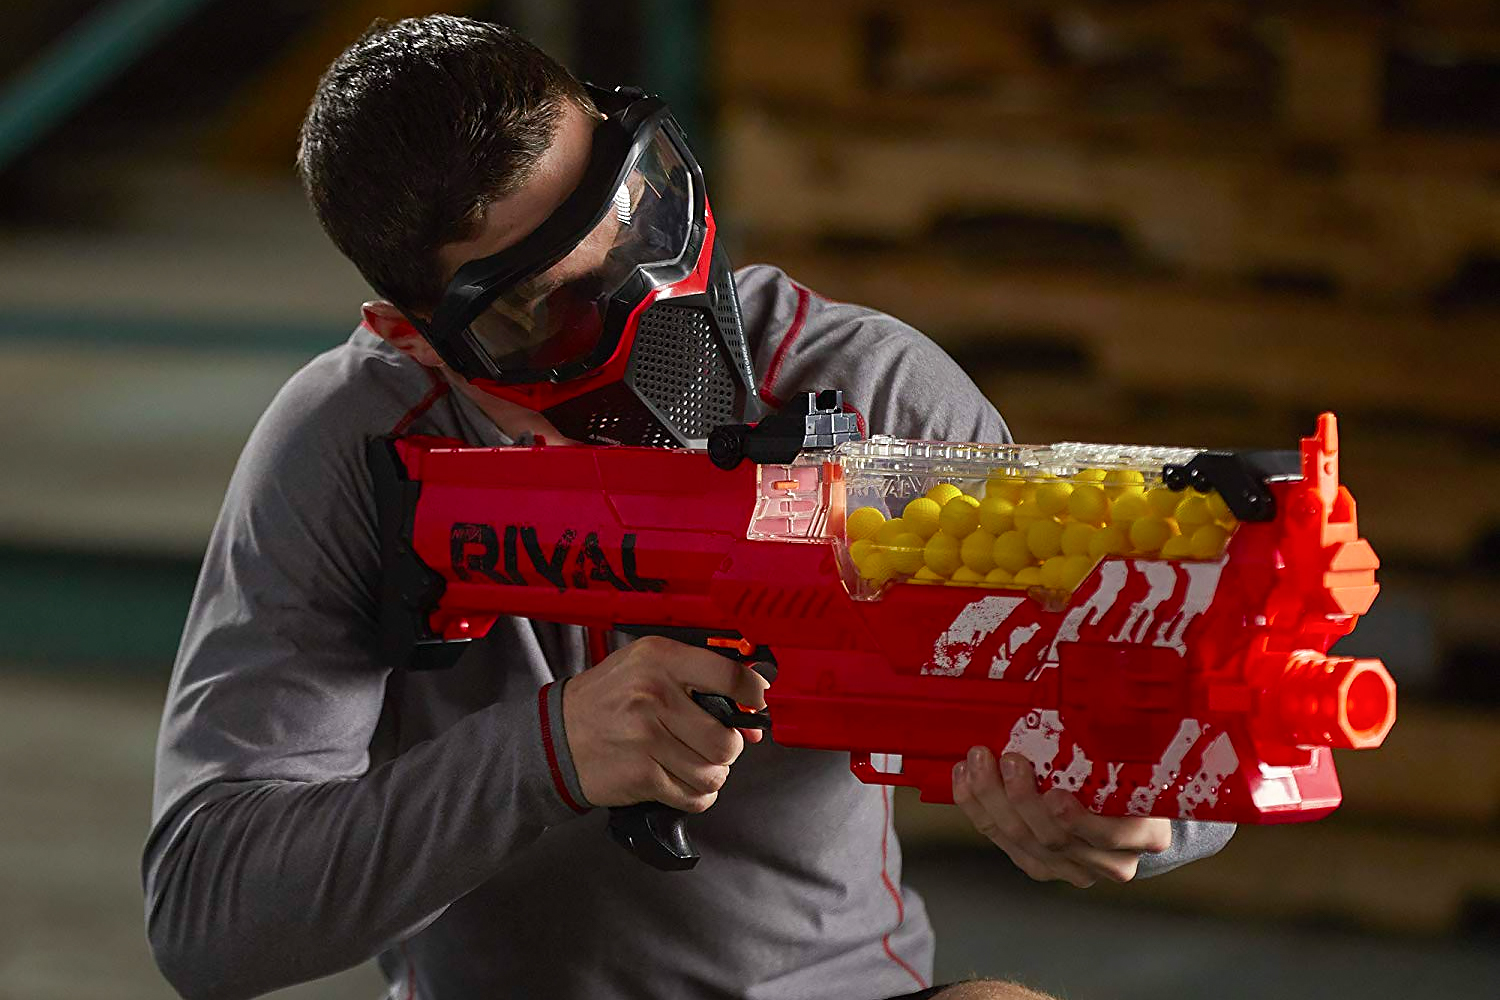 your inner child with these amusing Nerf guns - The Manual